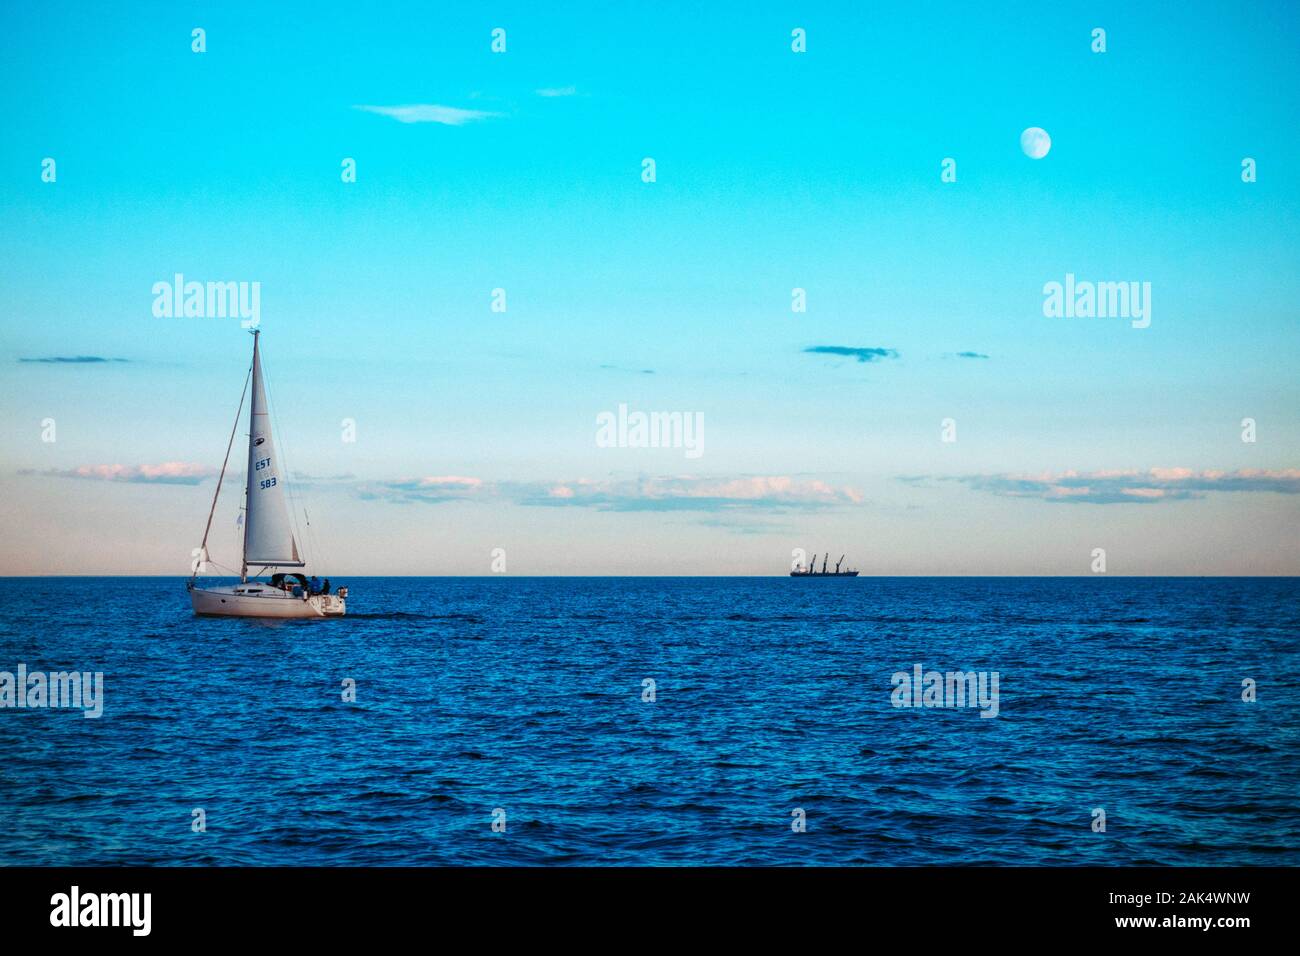 Sailing yacht out on the ocean Stock Photo